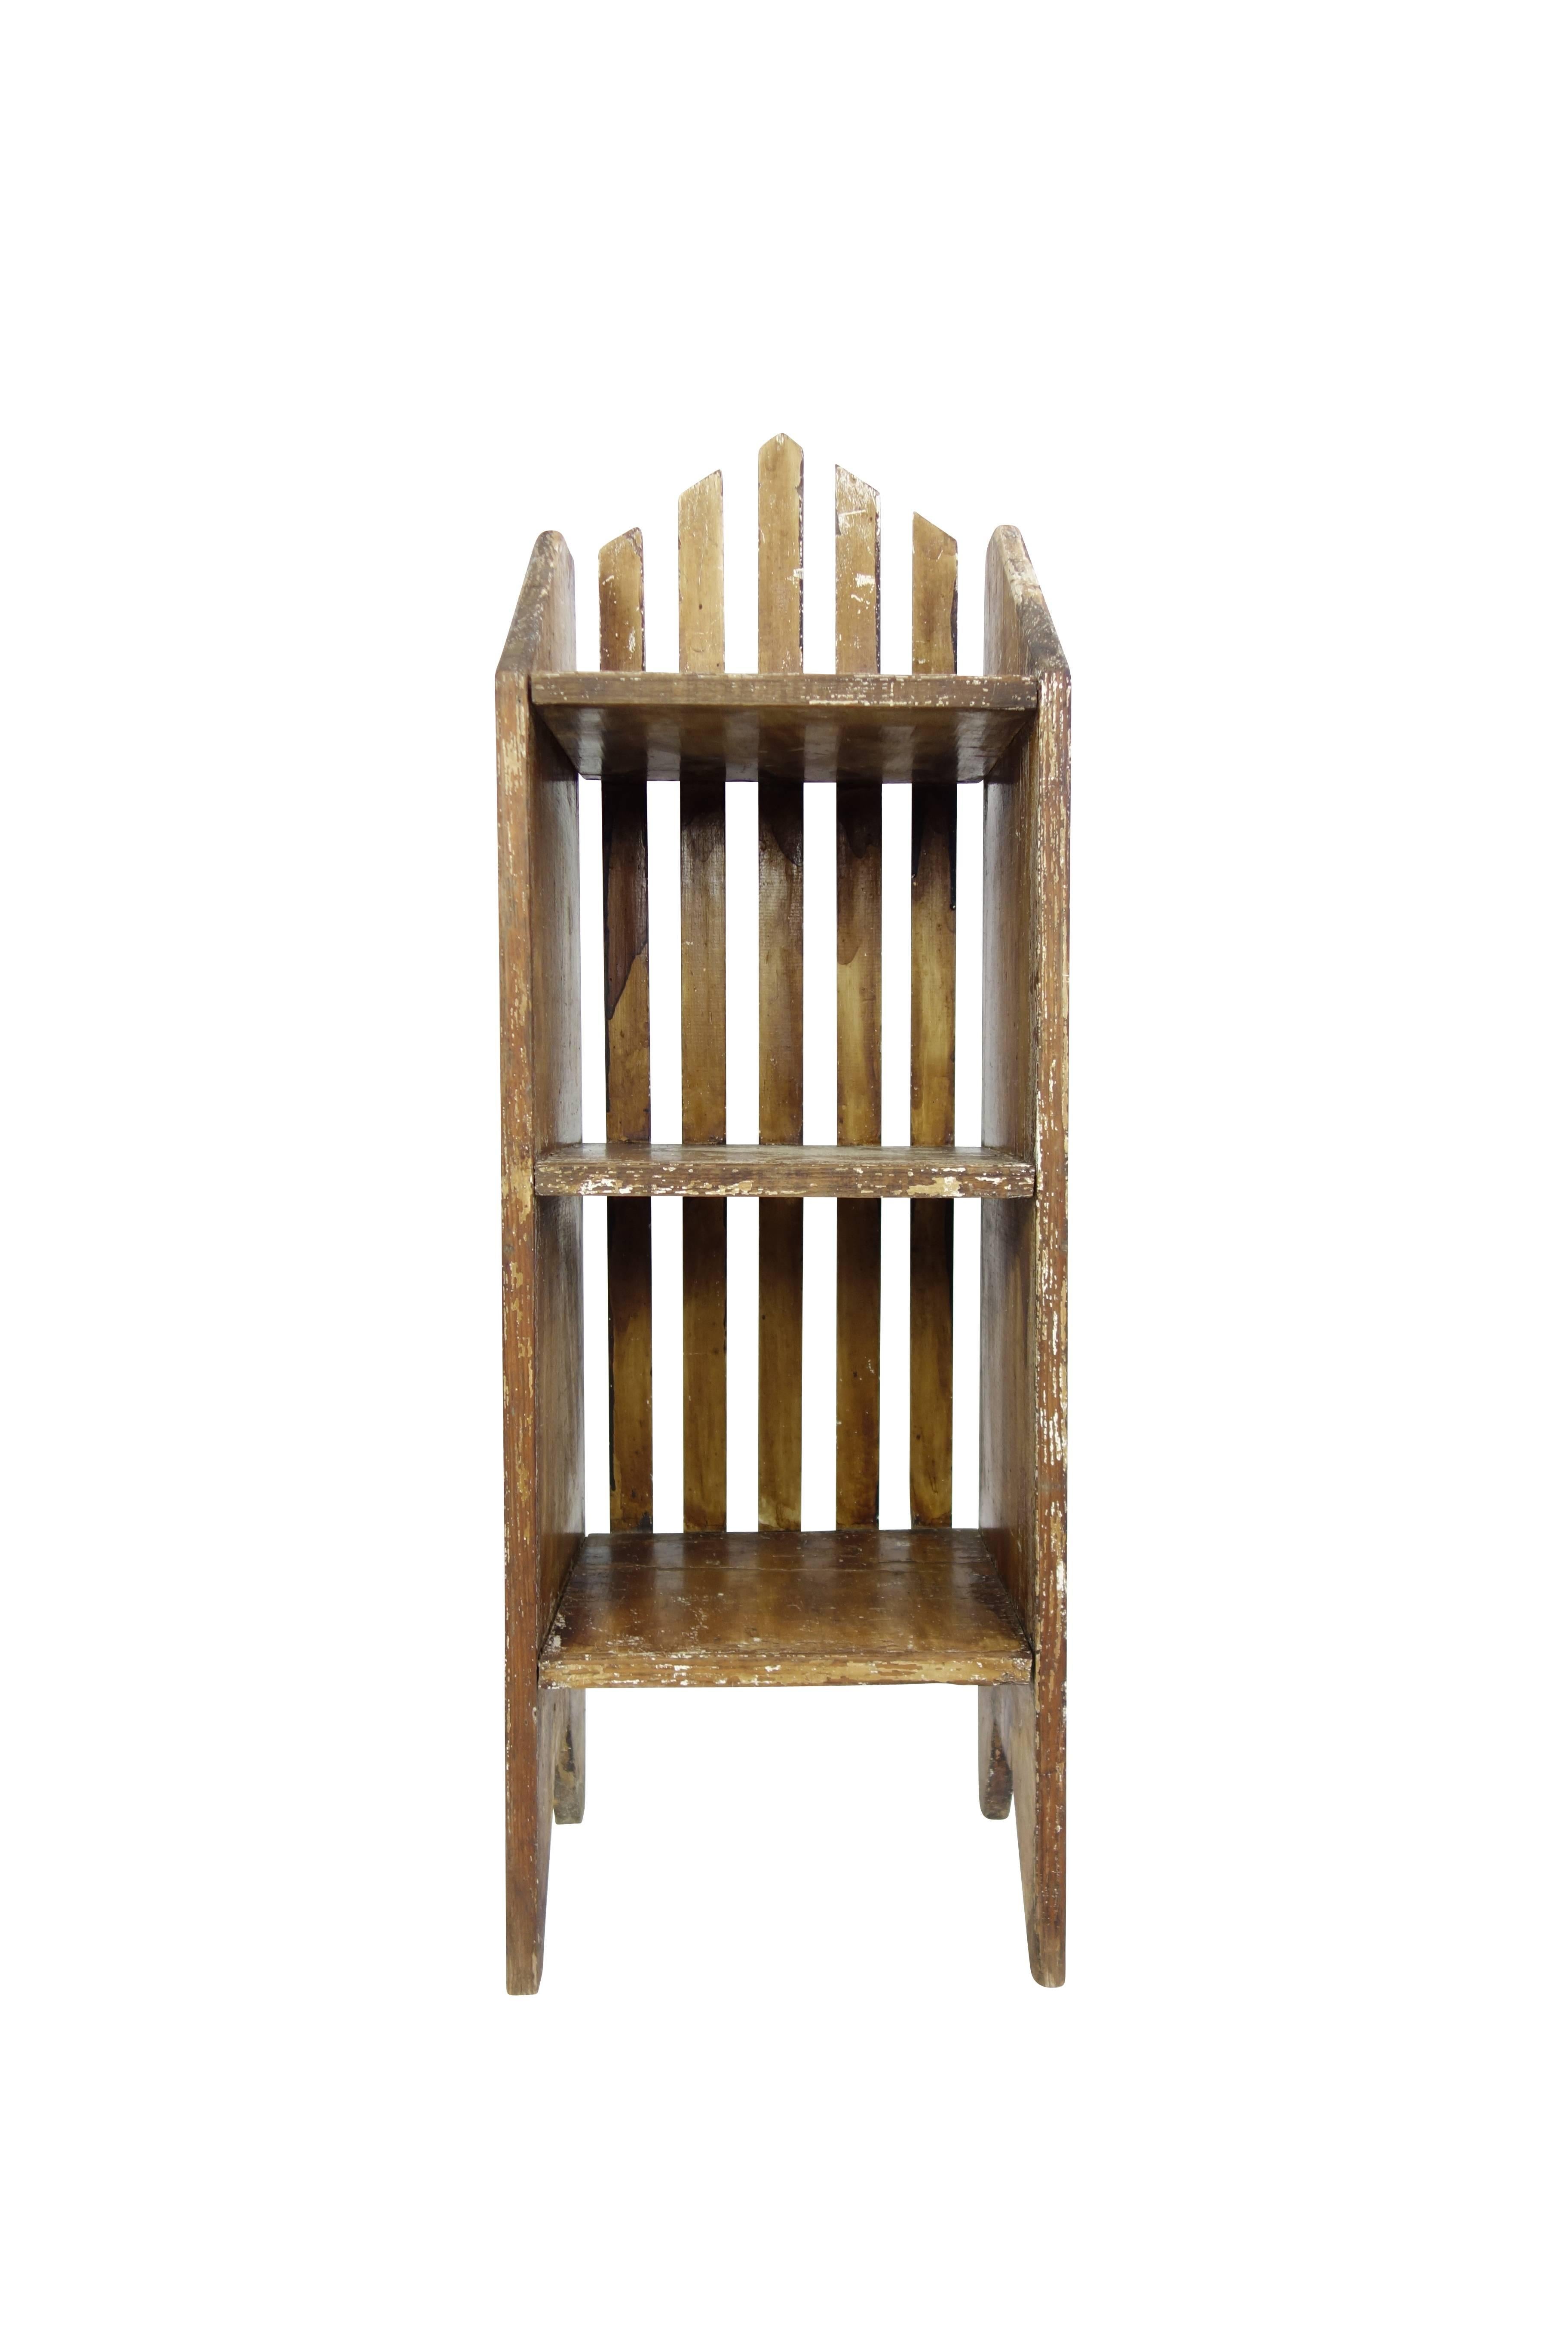 This is an unusual Primitive three-tiered shelf in its original paint.